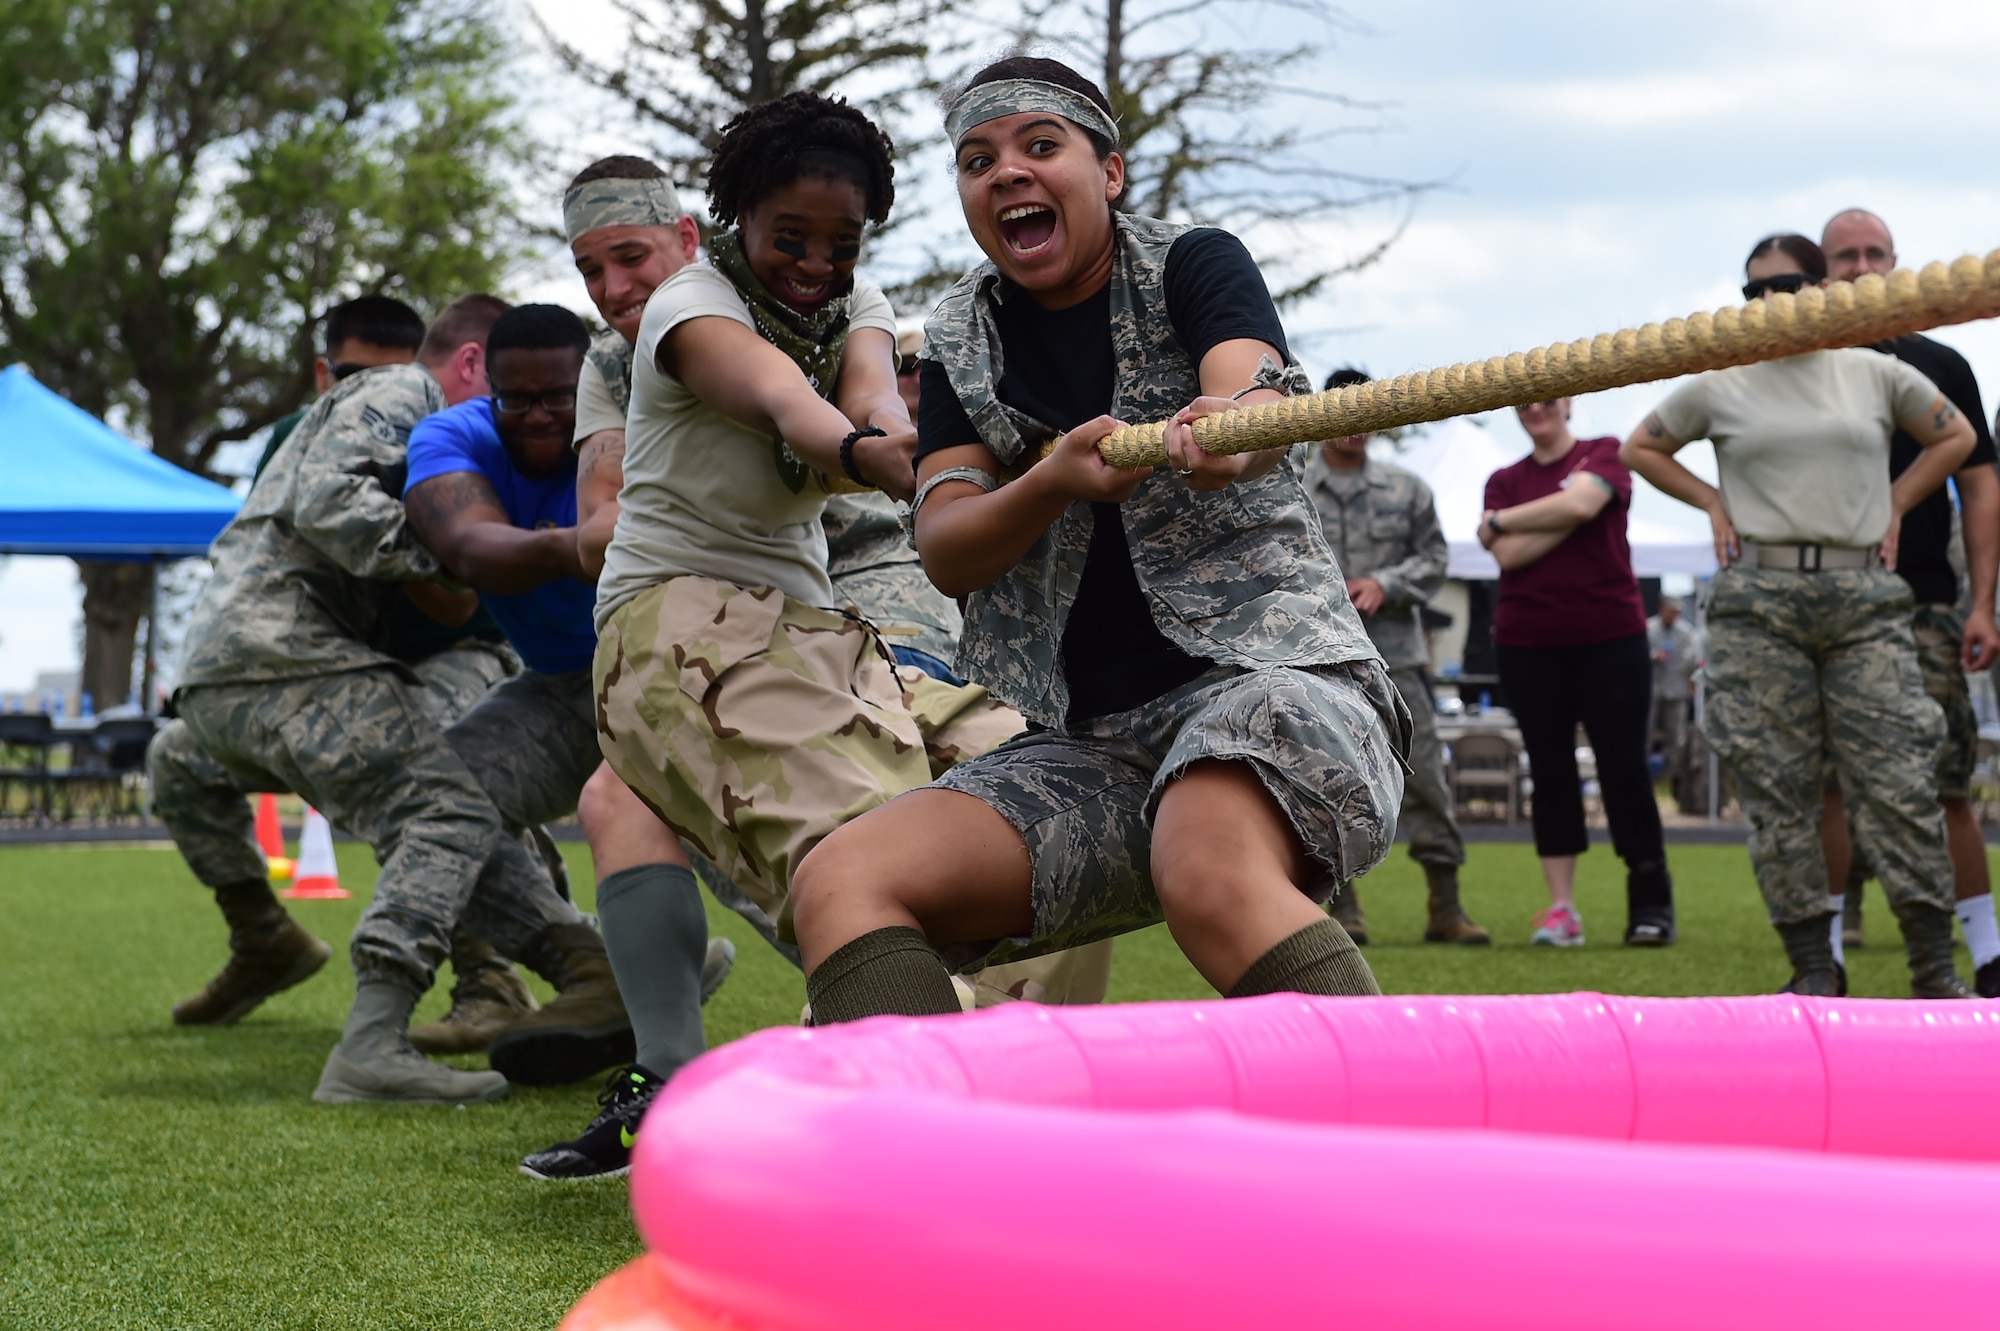 Team Buckley members participate in a tug-o-war during Junior Enlisted Appreciation Day June 26, 2015, at the all-purpose field on Buckley Air Force Base, Colo. Junior Enlisted Appreciation Day is held annually to recognize the efforts of E-4s and below on Buckley AFB. (U. S. Air Force photo by Airman 1st Class Luke W. Nowakowski/Released)